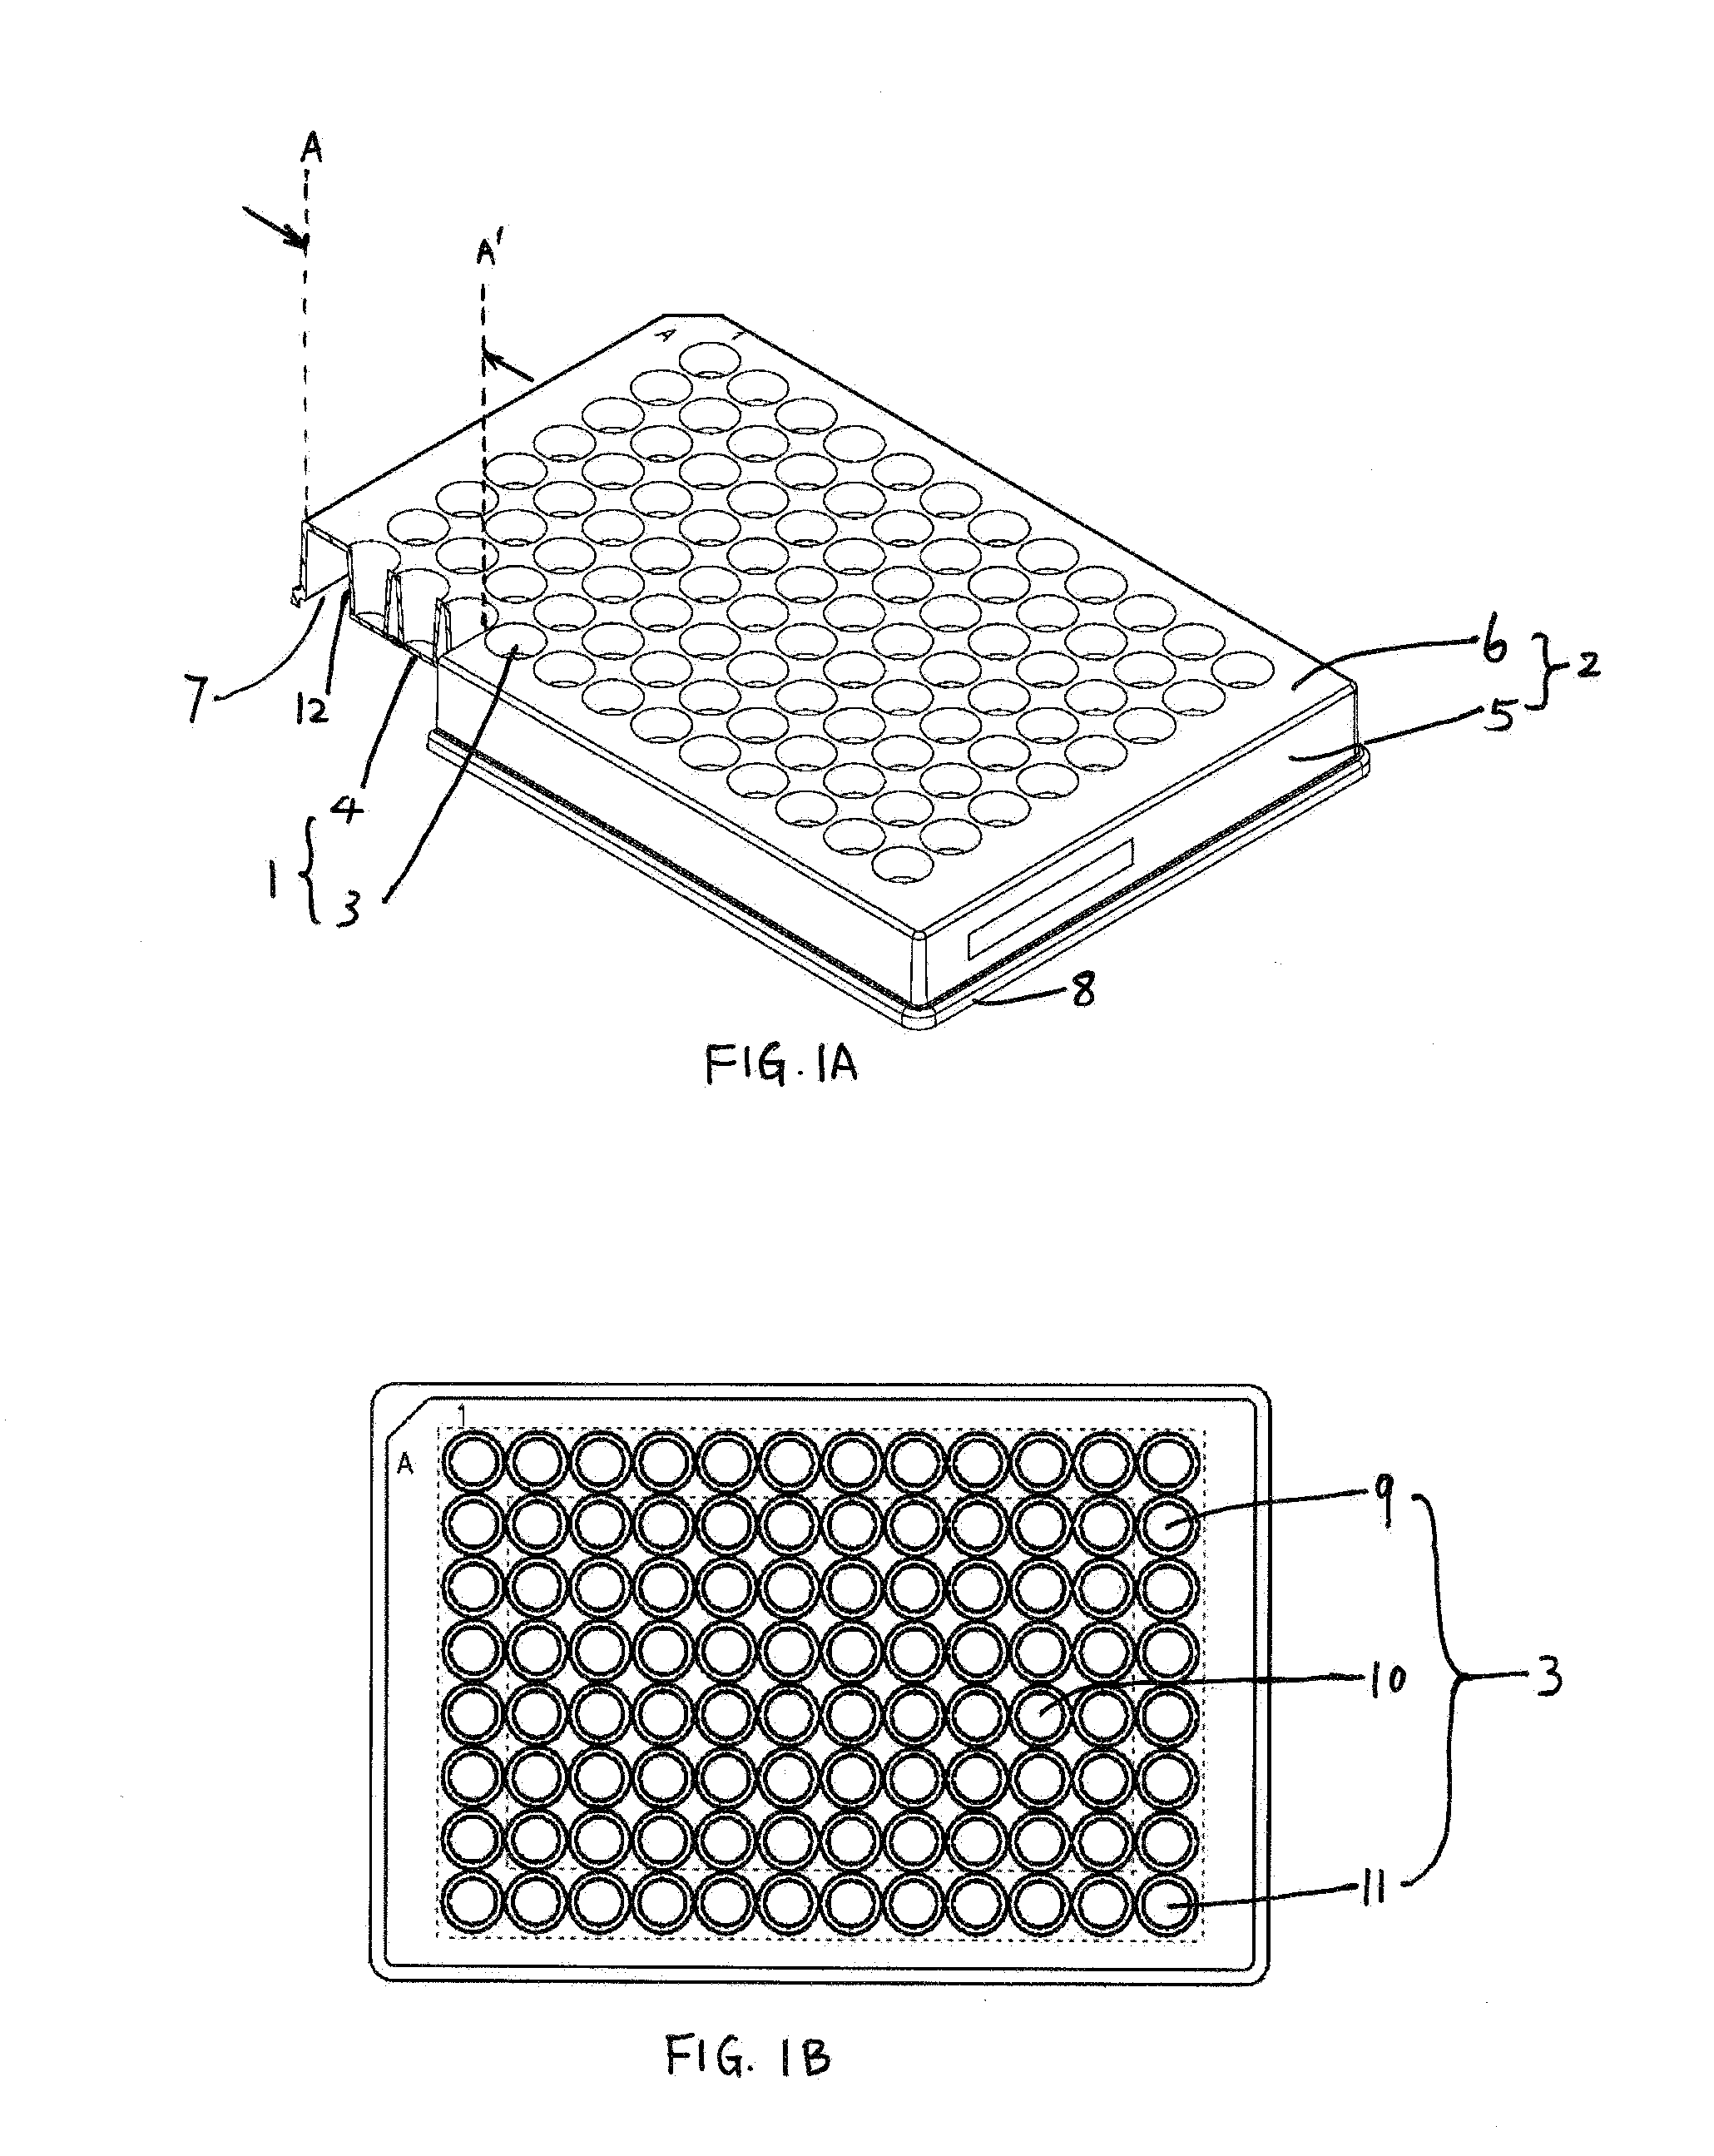 Microplate with fewer peripheral artifacts